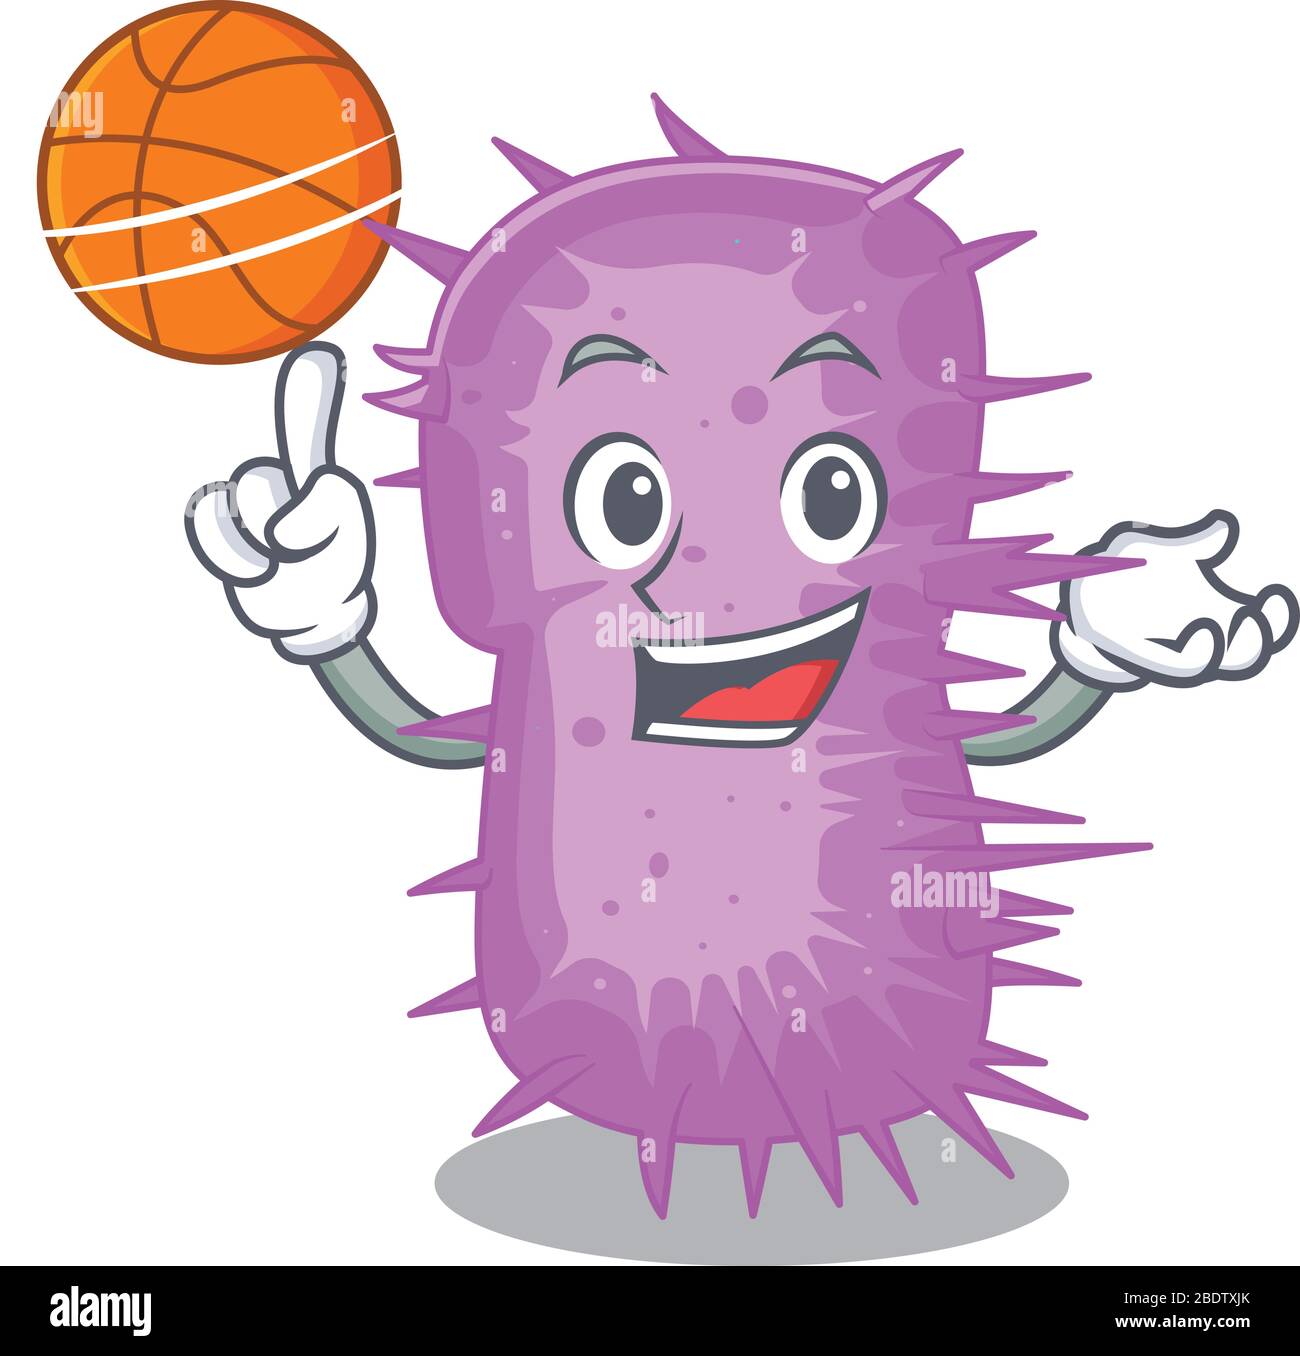 Gorgeous acinetobacter baumannii mascot design style with basketball Stock Vector